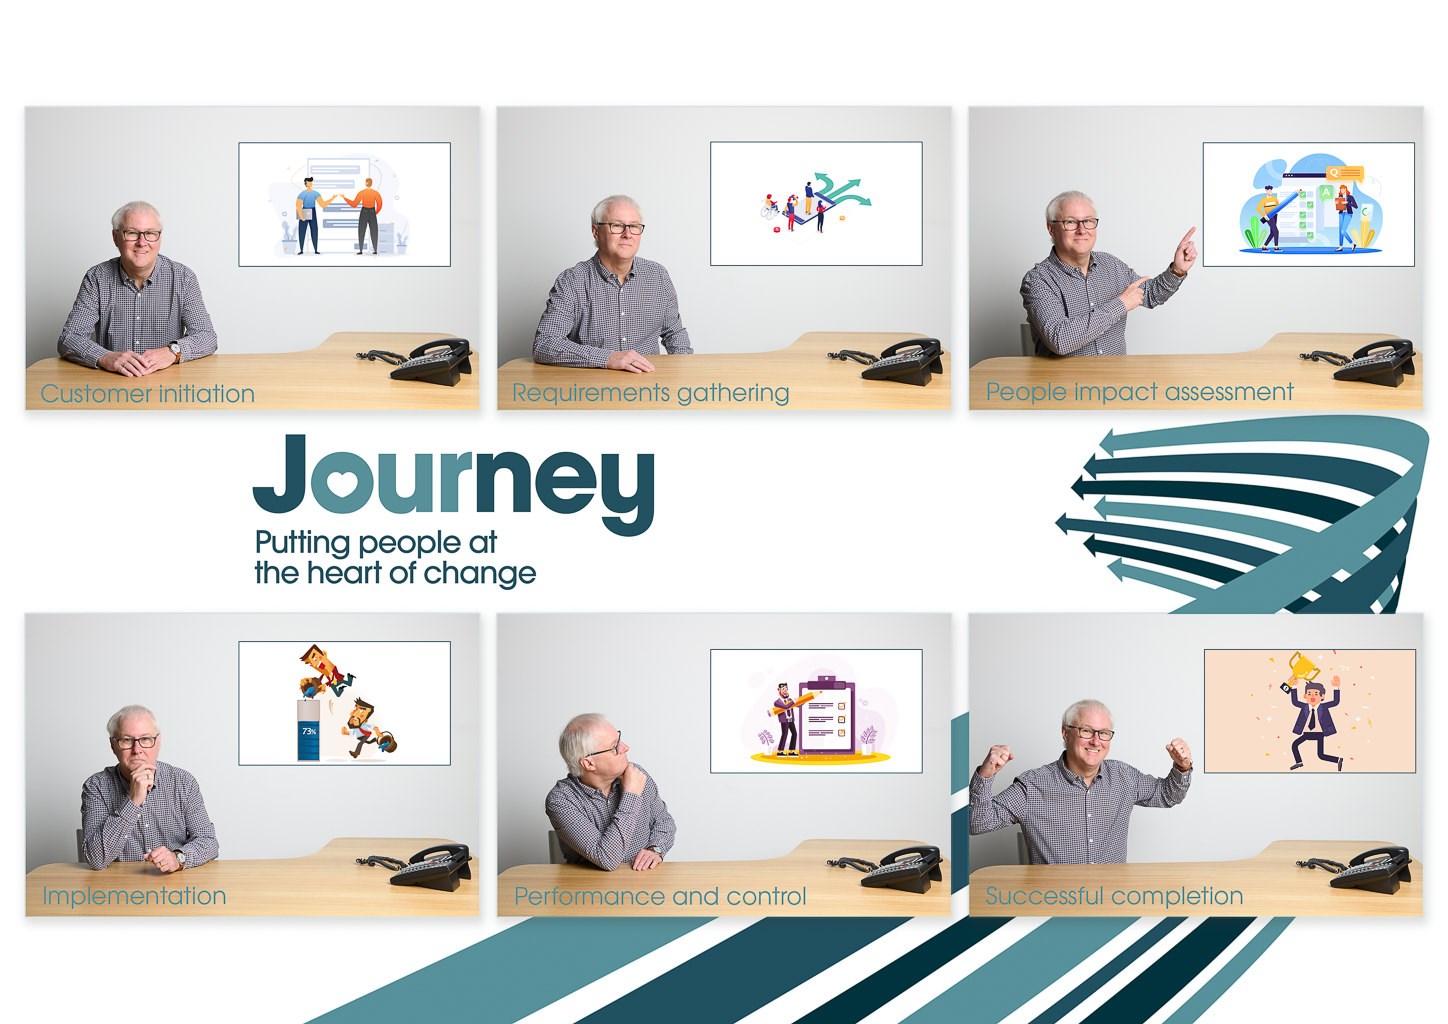 Image shows the stages of the "Journey" bespoke programme by Ocius Consulting 